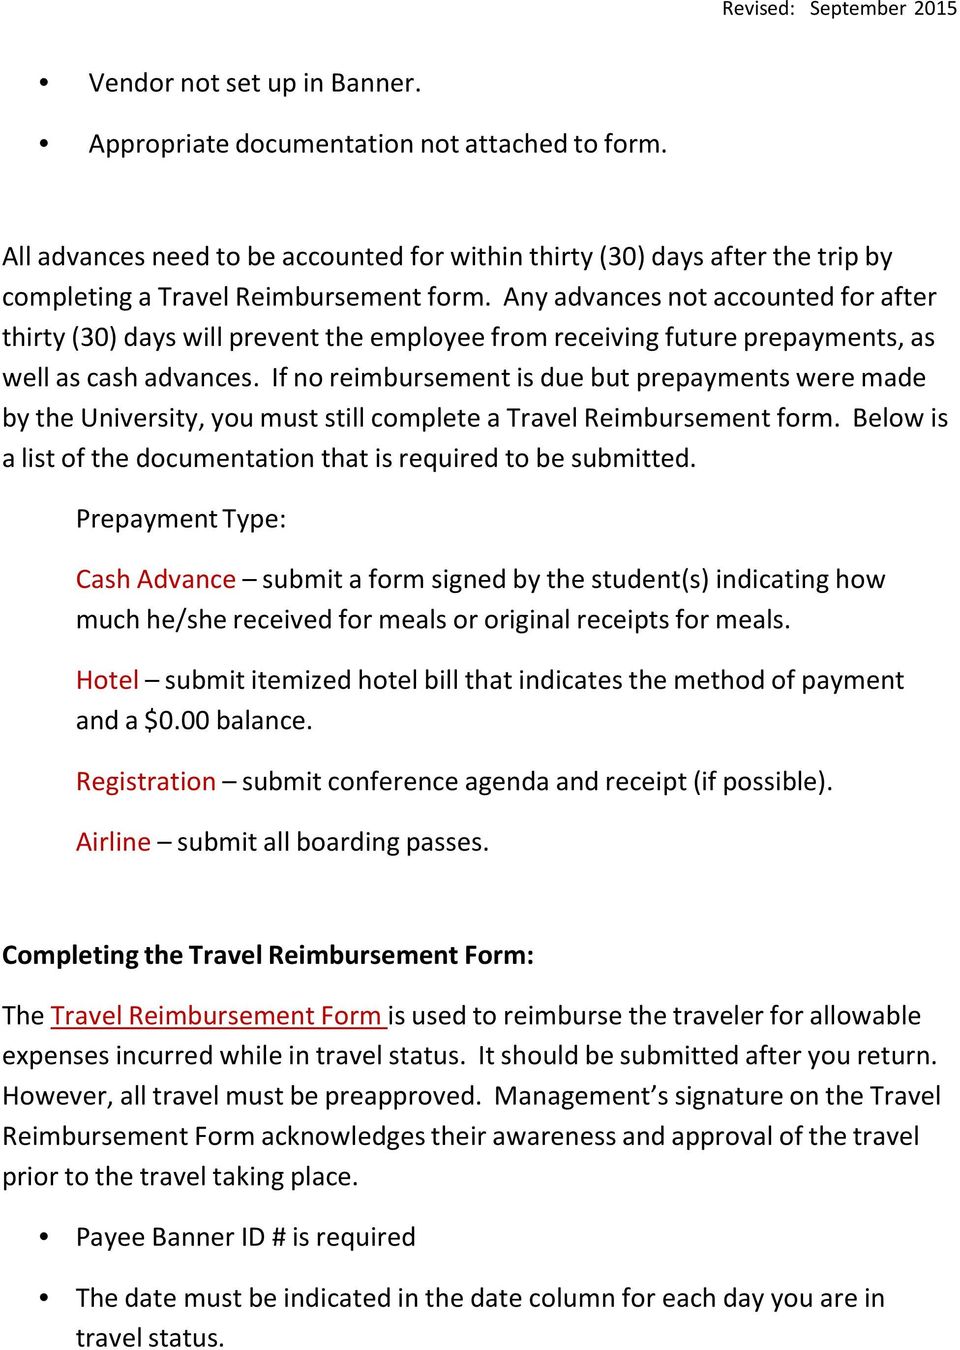 If no reimbursement is due but prepayments were made by the University, you must still complete a Travel Reimbursement form. Below is a list of the documentation that is required to be submitted.